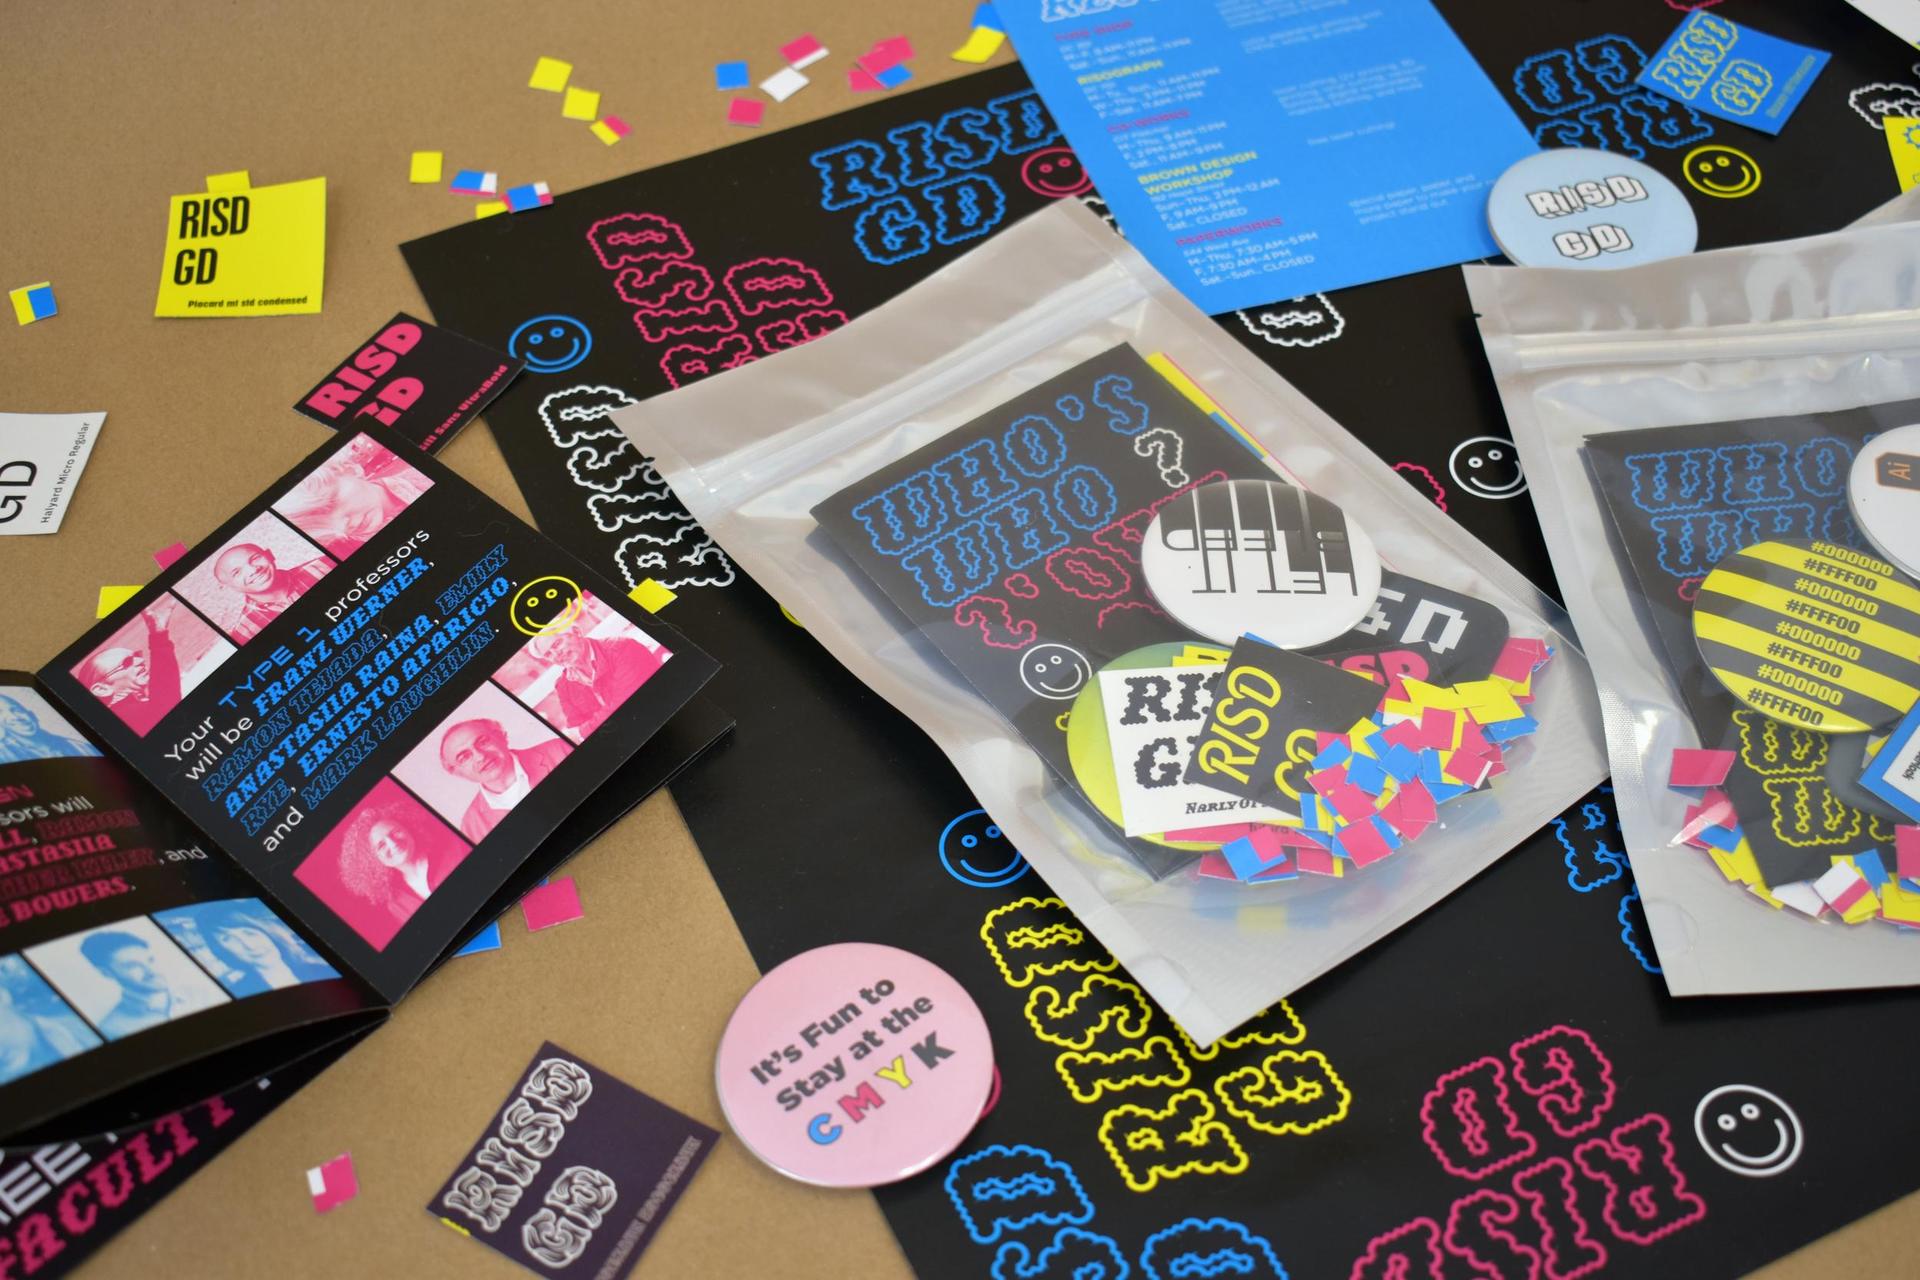 Printed 'RISD GD' buttons, paper and stickers